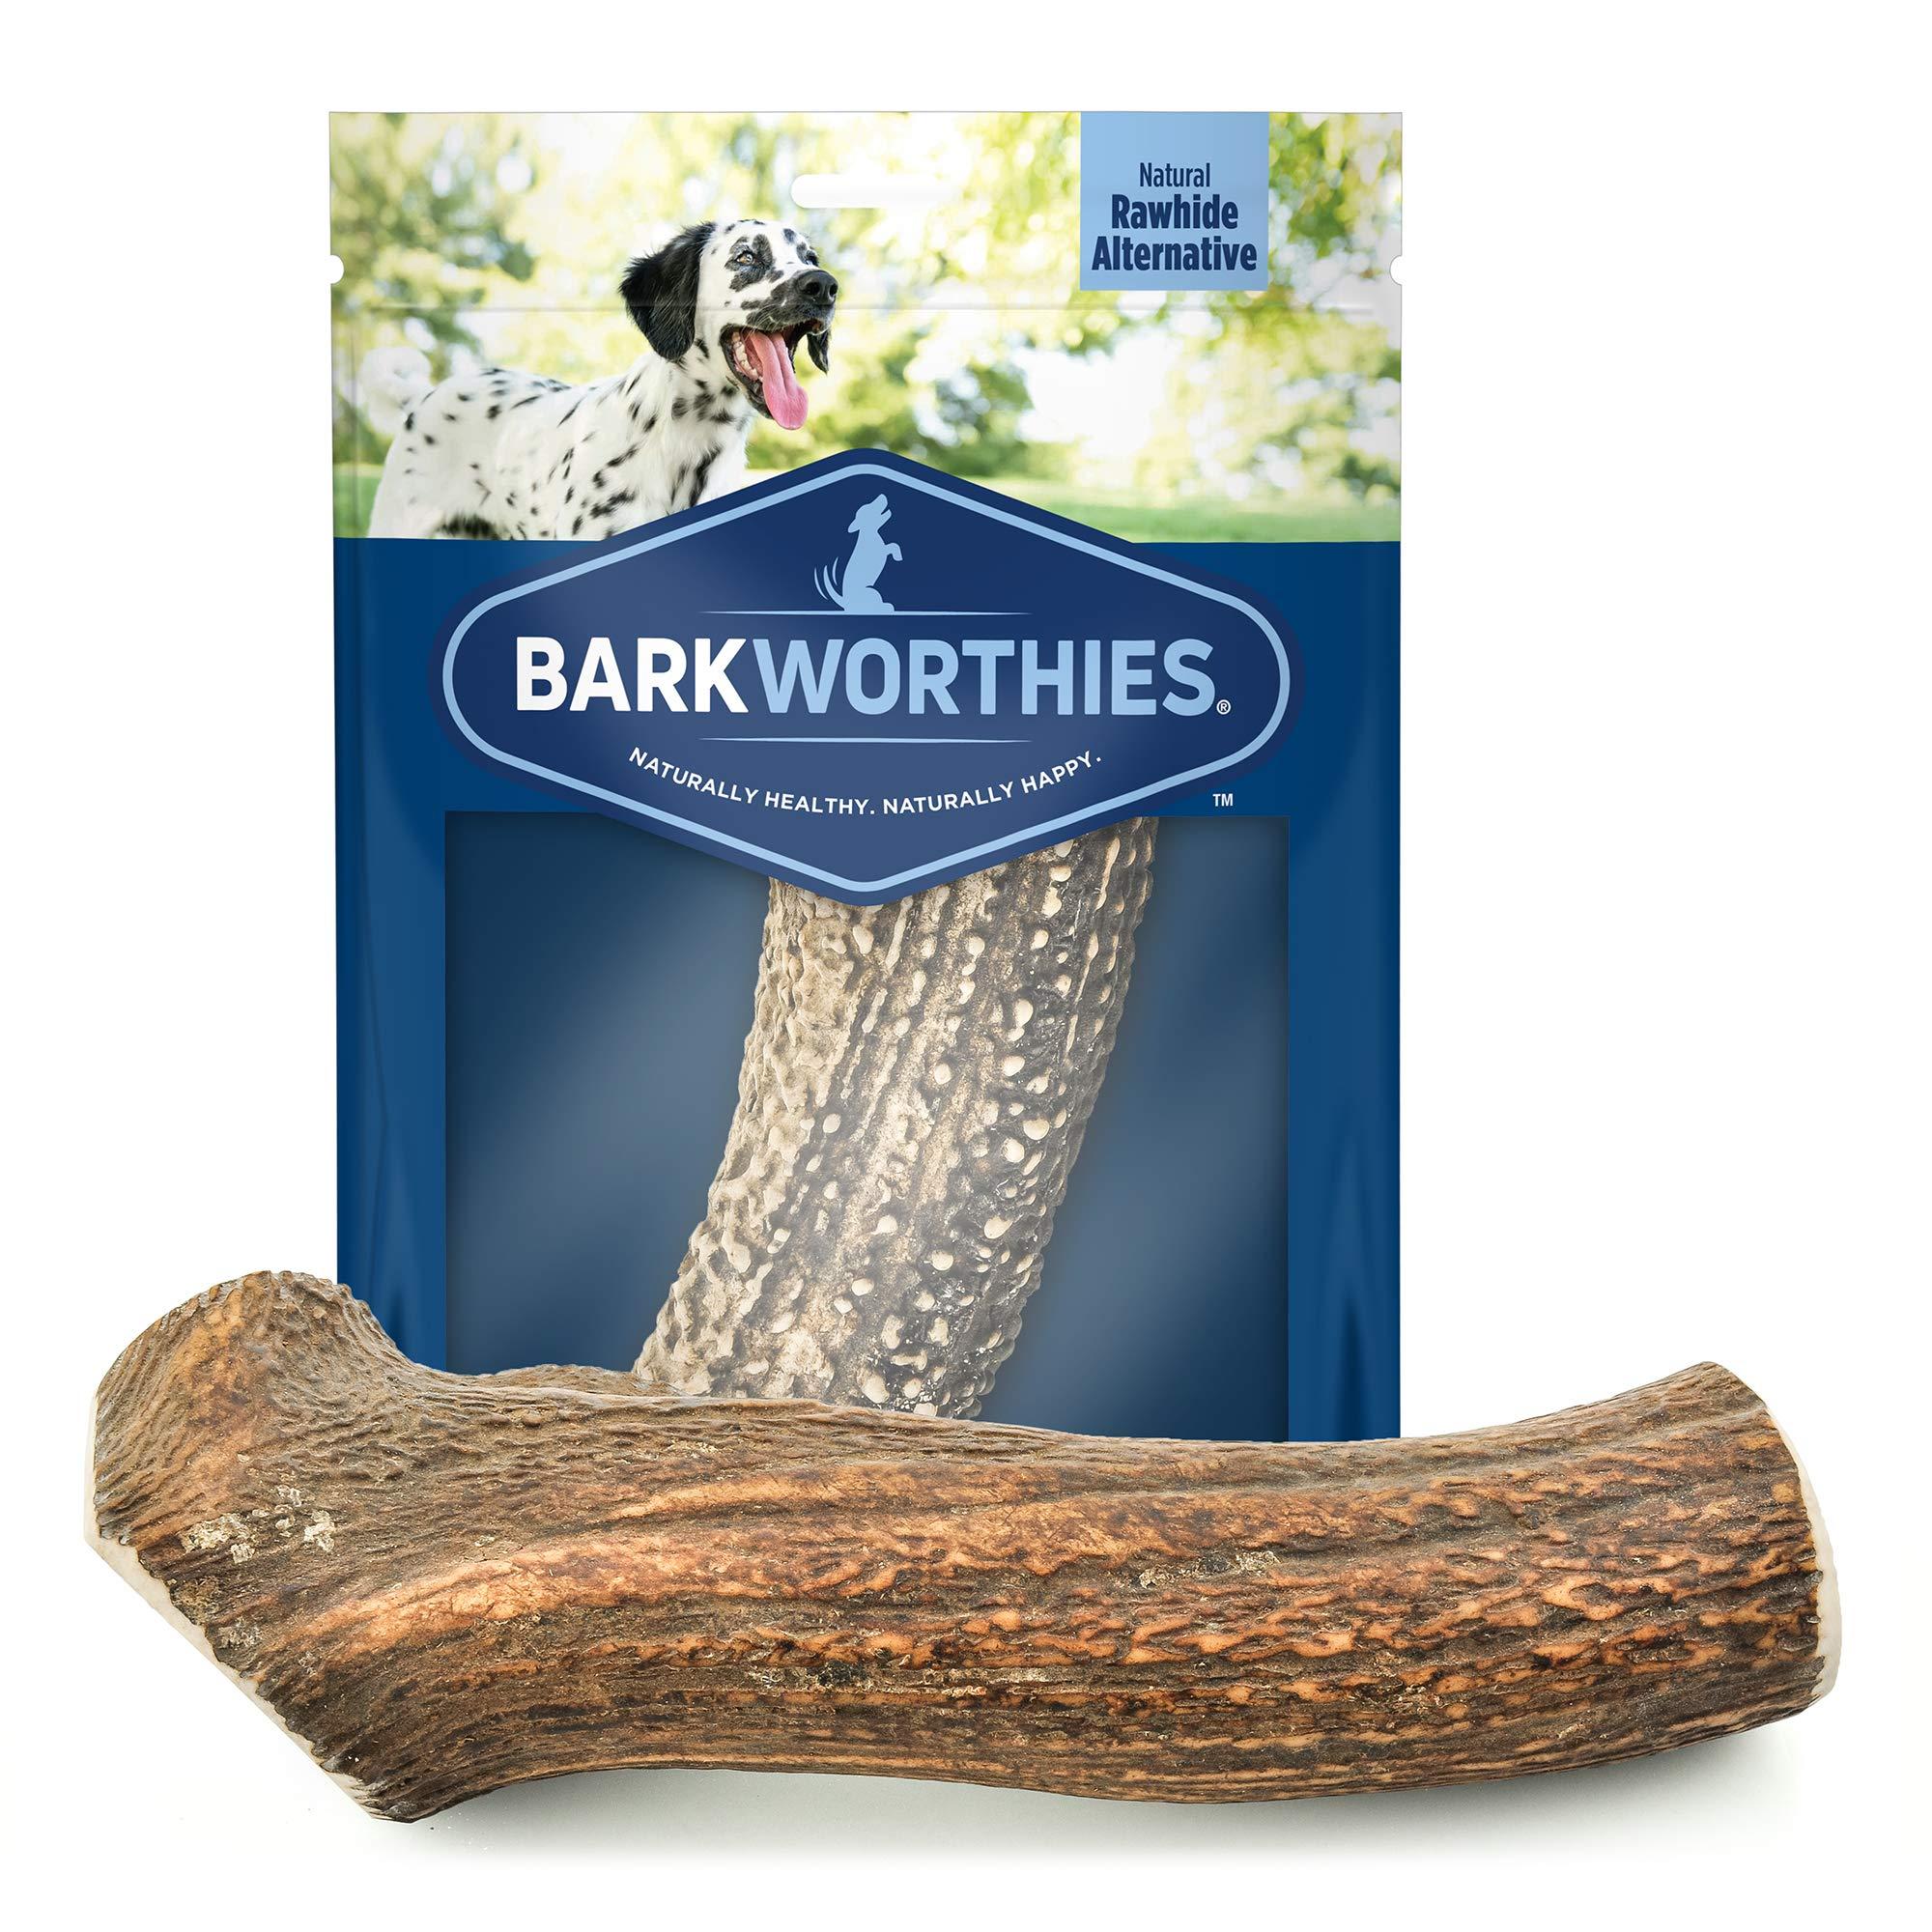 Barkworthies Hand Selected Naturally Shed Extra Large Whole Elk Antler (Single Antler) - Long Lasting, Odor Free Dog Chew for XL Breed Dogs - No Chemical Treatments, No Added Preservatives